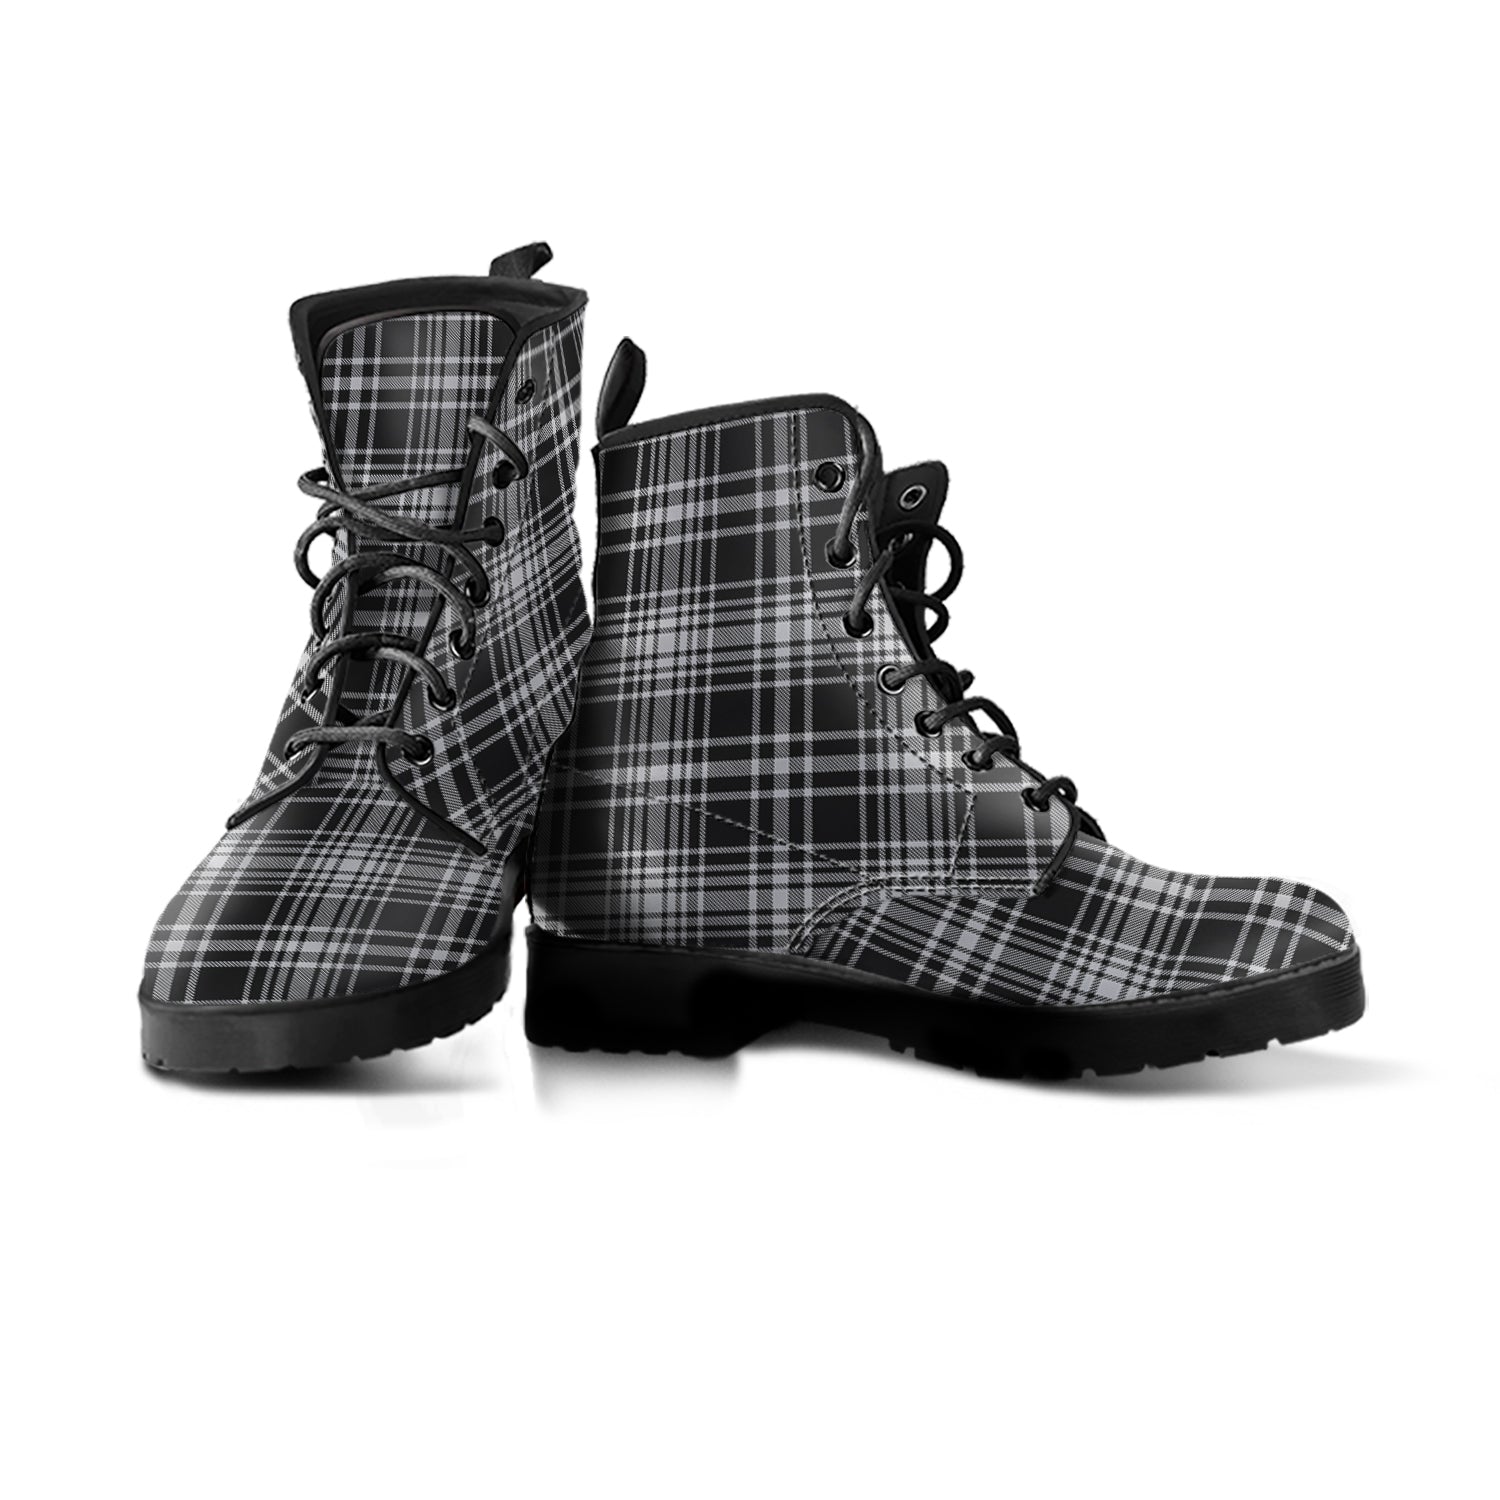 scottish-maclean-black-and-white-clan-tartan-leather-boots